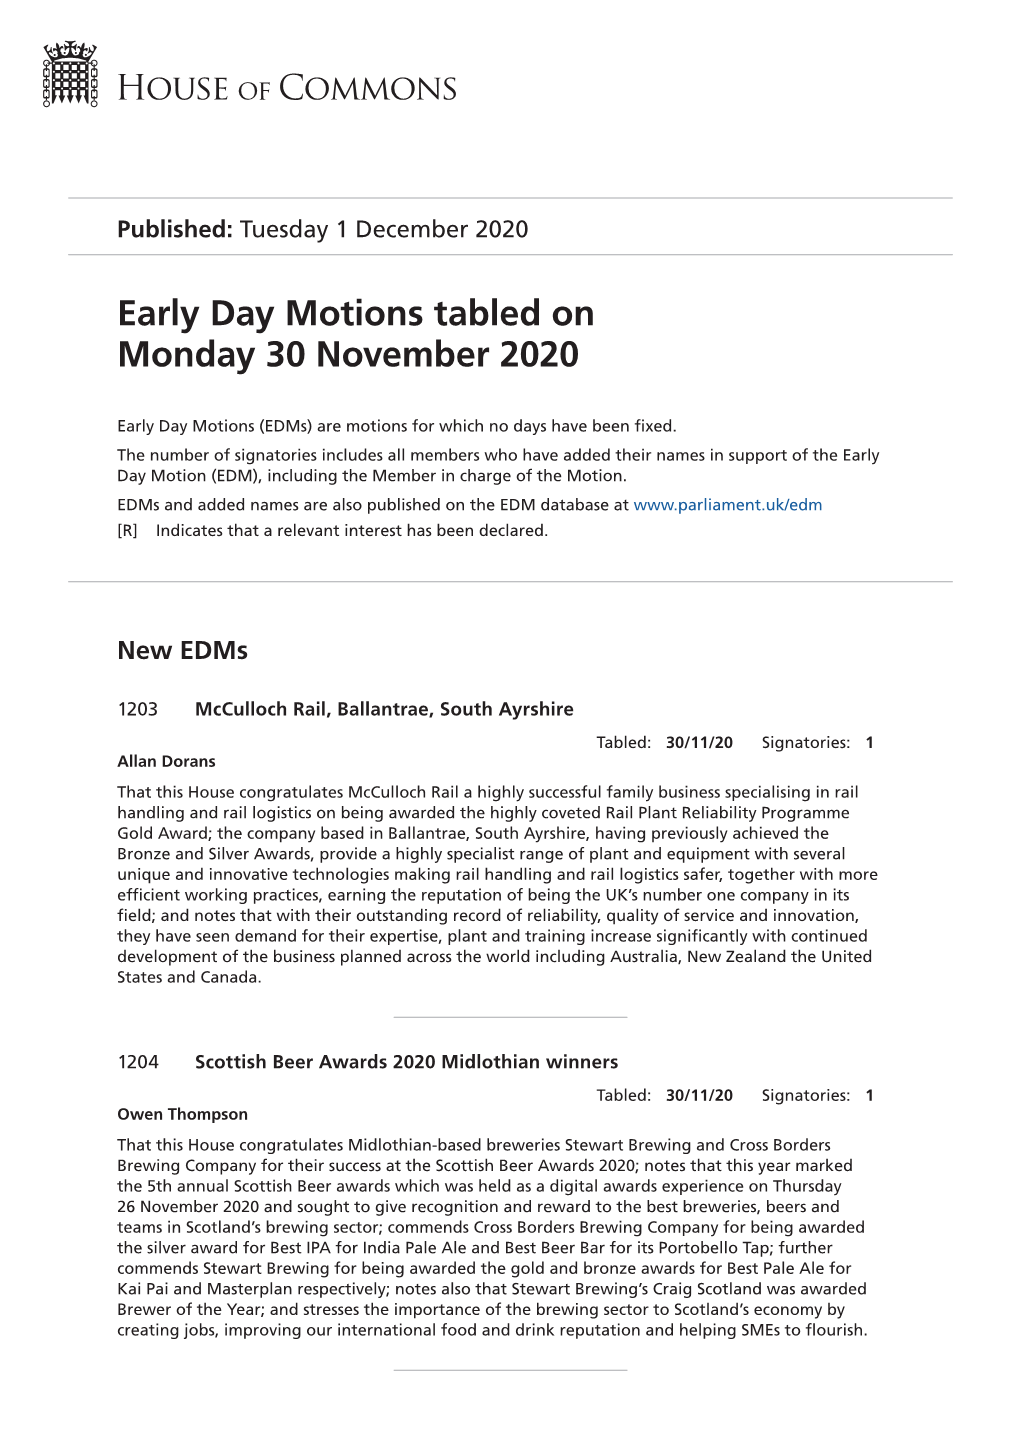 Early Day Motions Tabled on Monday 30 November 2020